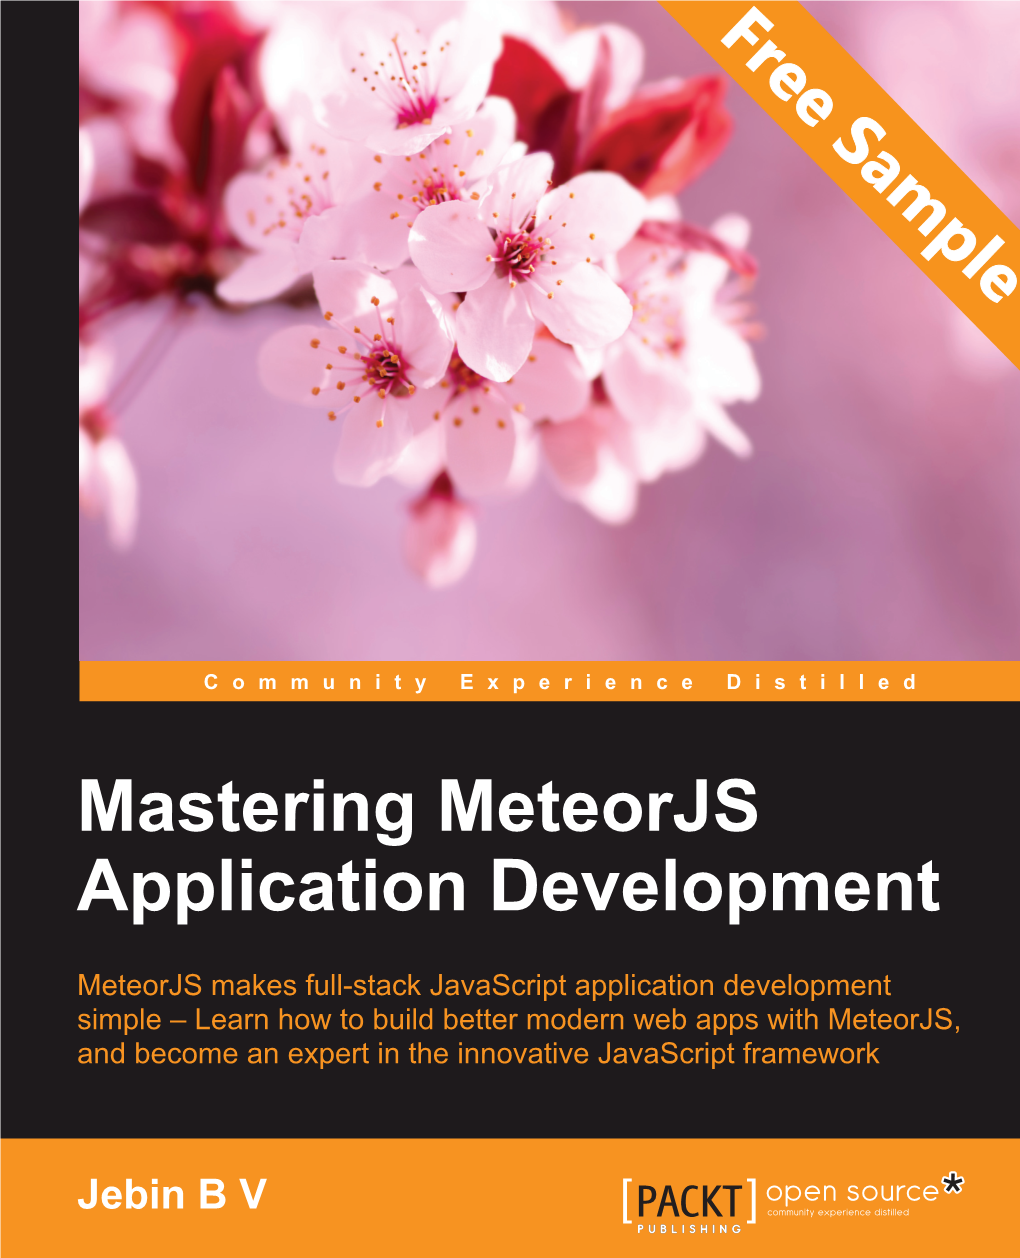 Chapter 4, Integrating Your Favorite Frameworks, Guides the Readers to Use Angular.Js and React.Js with Meteorjs